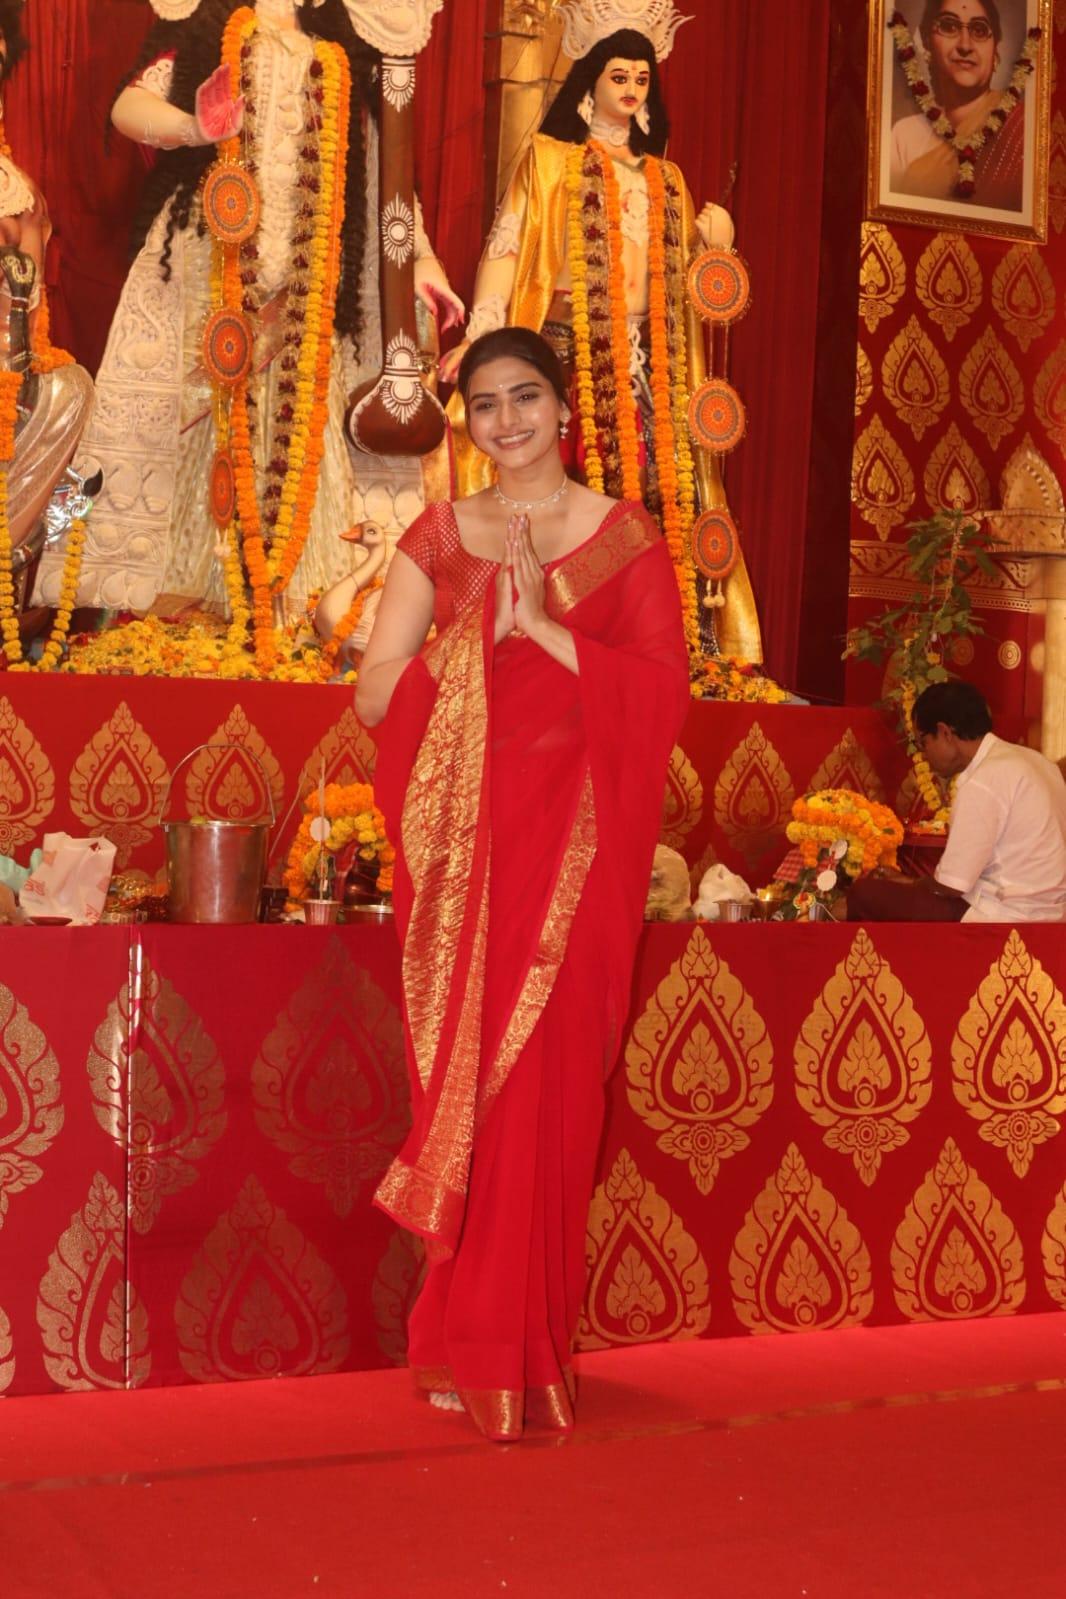 Prachi Desai opted for a red outfit as she went to seek blessings at the Durga puja pandal in Juhu